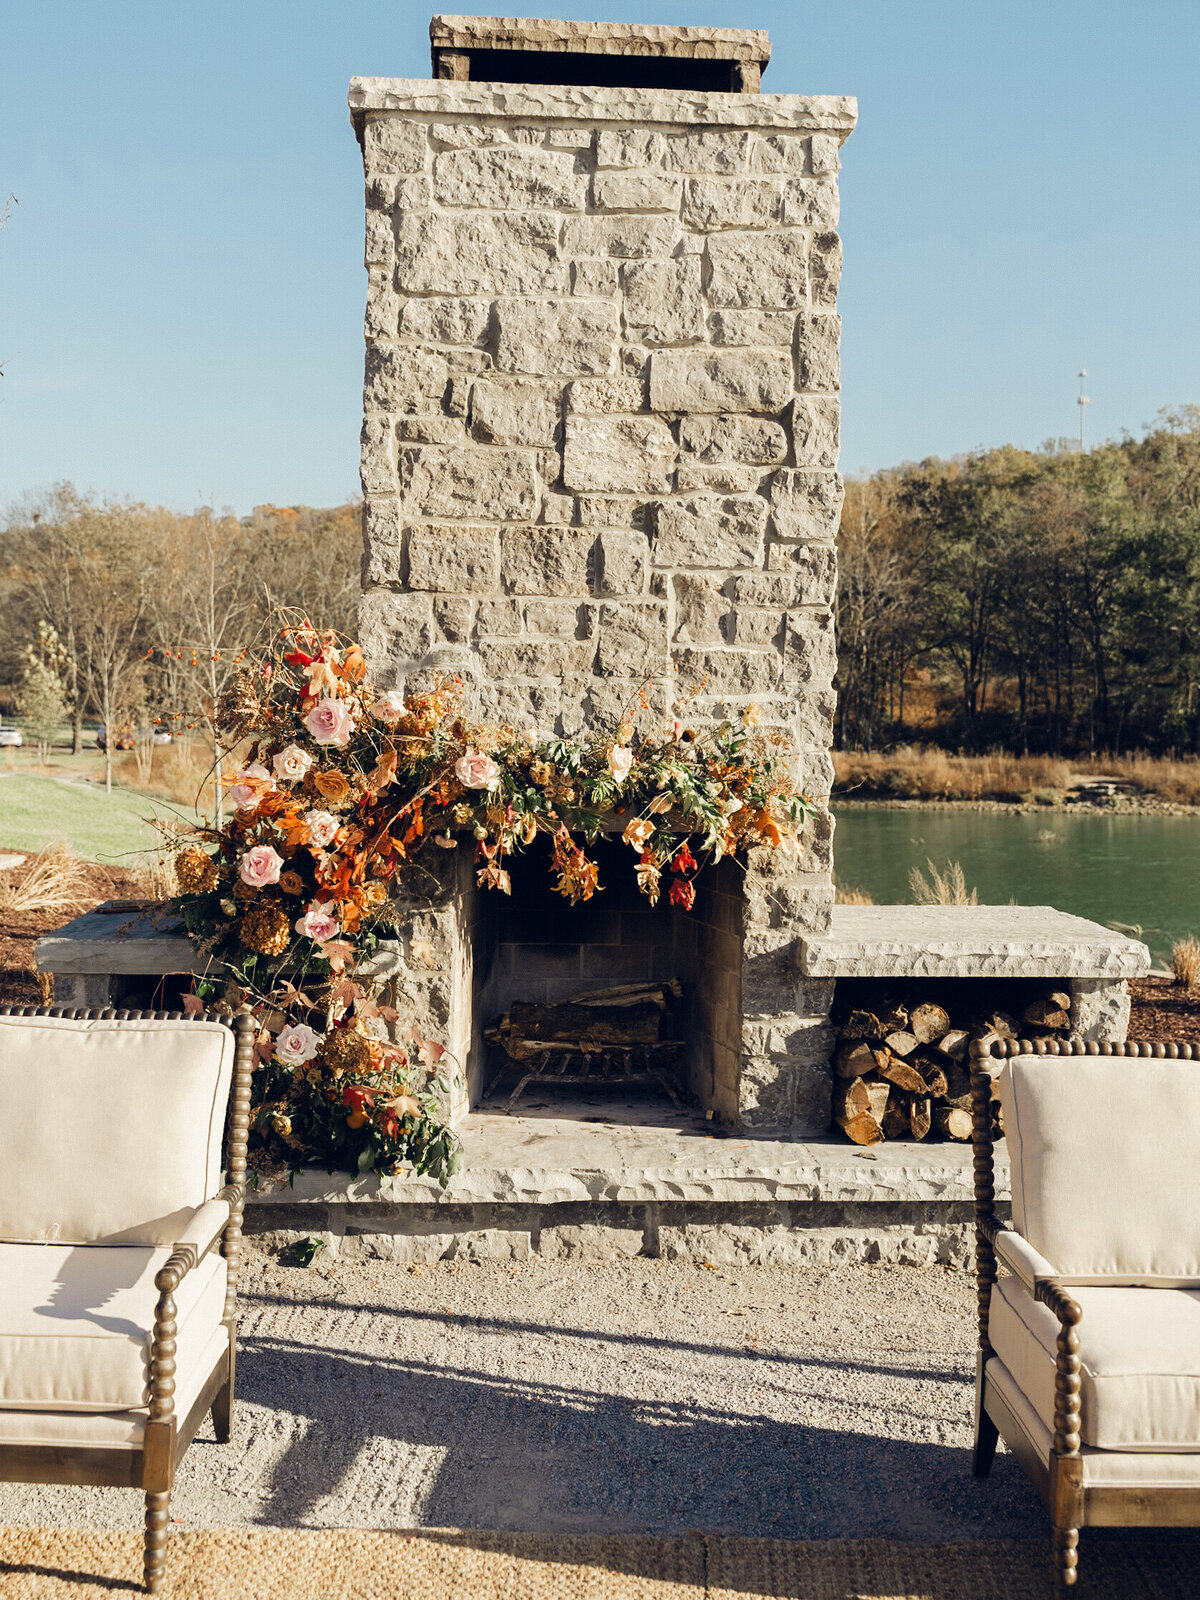 Fireplace floral moment for fall wedding reception at Southall Farm & Inn. Lush floral moment on fireplace in unique floral palette caramel, honey, dusty rose, peach, copper, and burgundy. Fall foliage and roses decorate this cocktail hour lounge area. Destination wedding outside Nashville, TN. Design by Rosemary & Finch Floral Design in Nashville, TN.